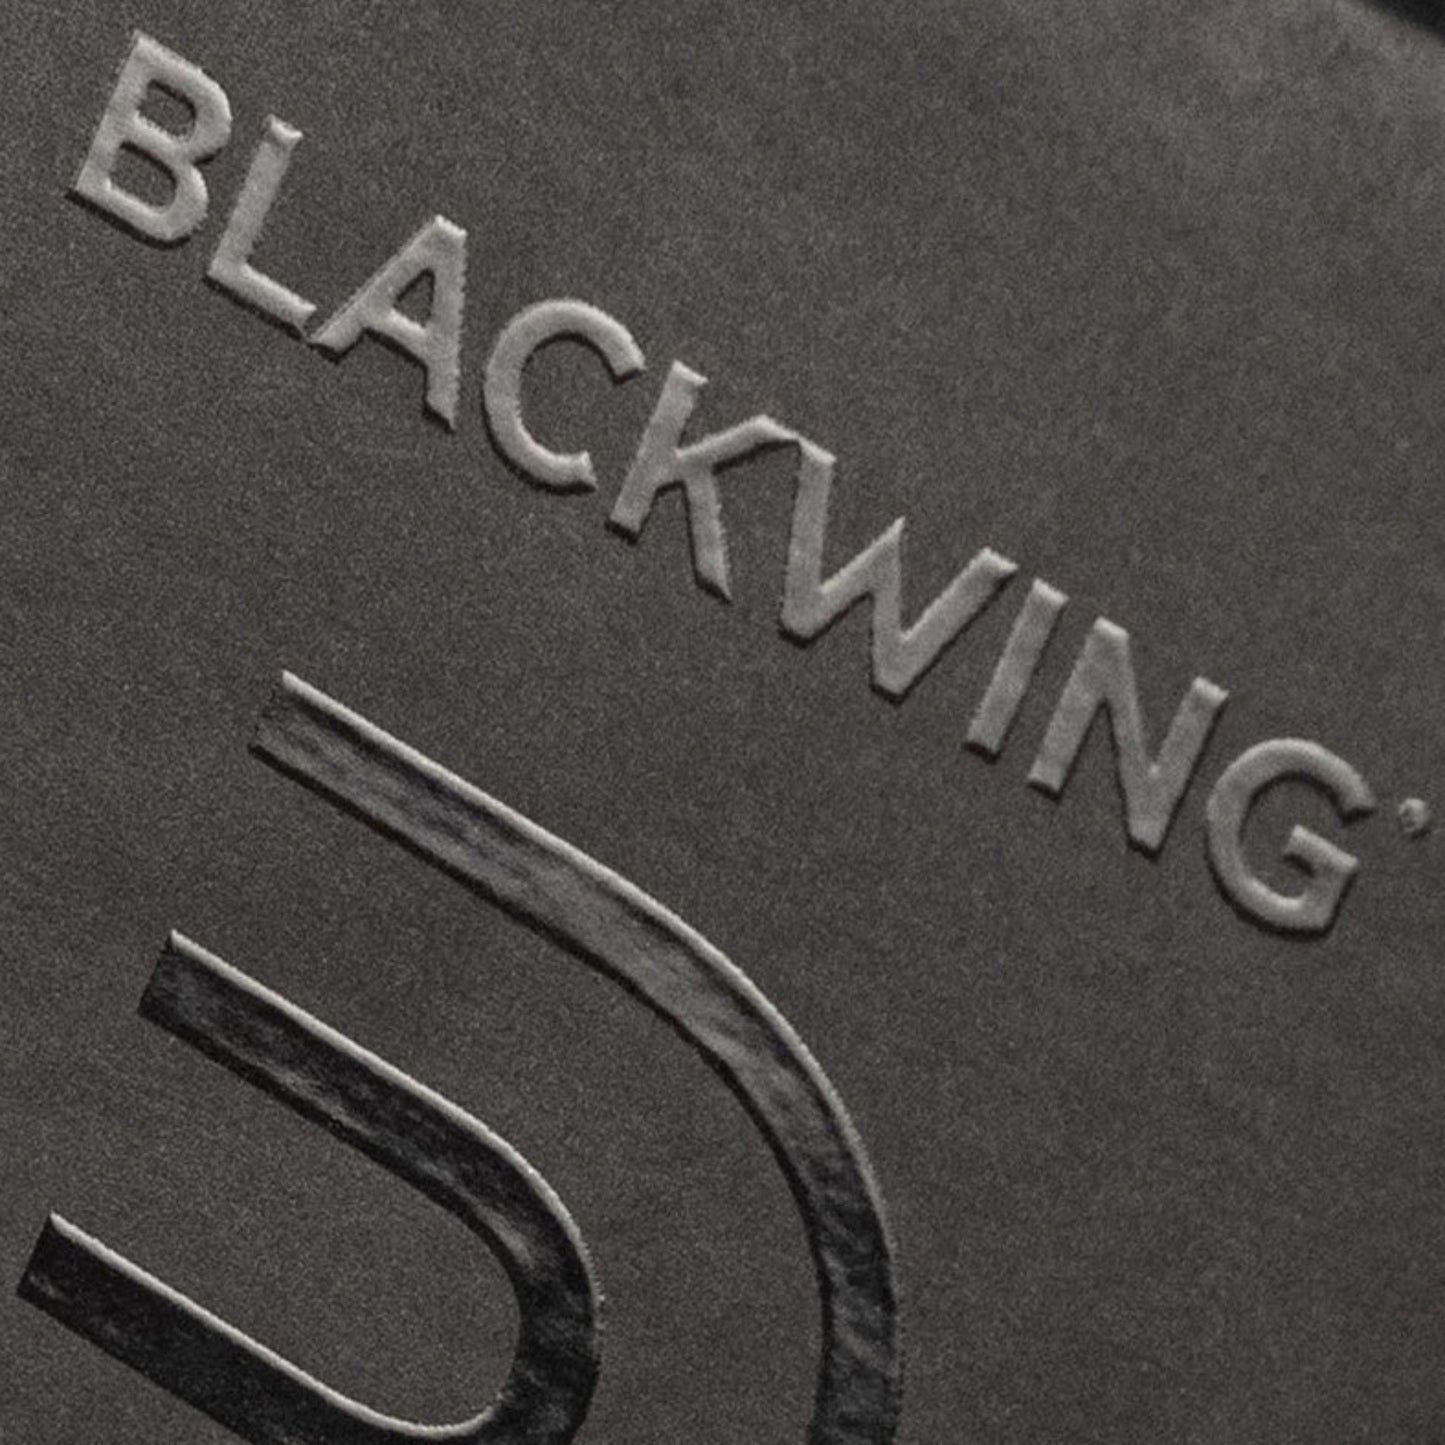 Blackwing - Natural Graphite Pencils - Extra Firm - Grierson Studio